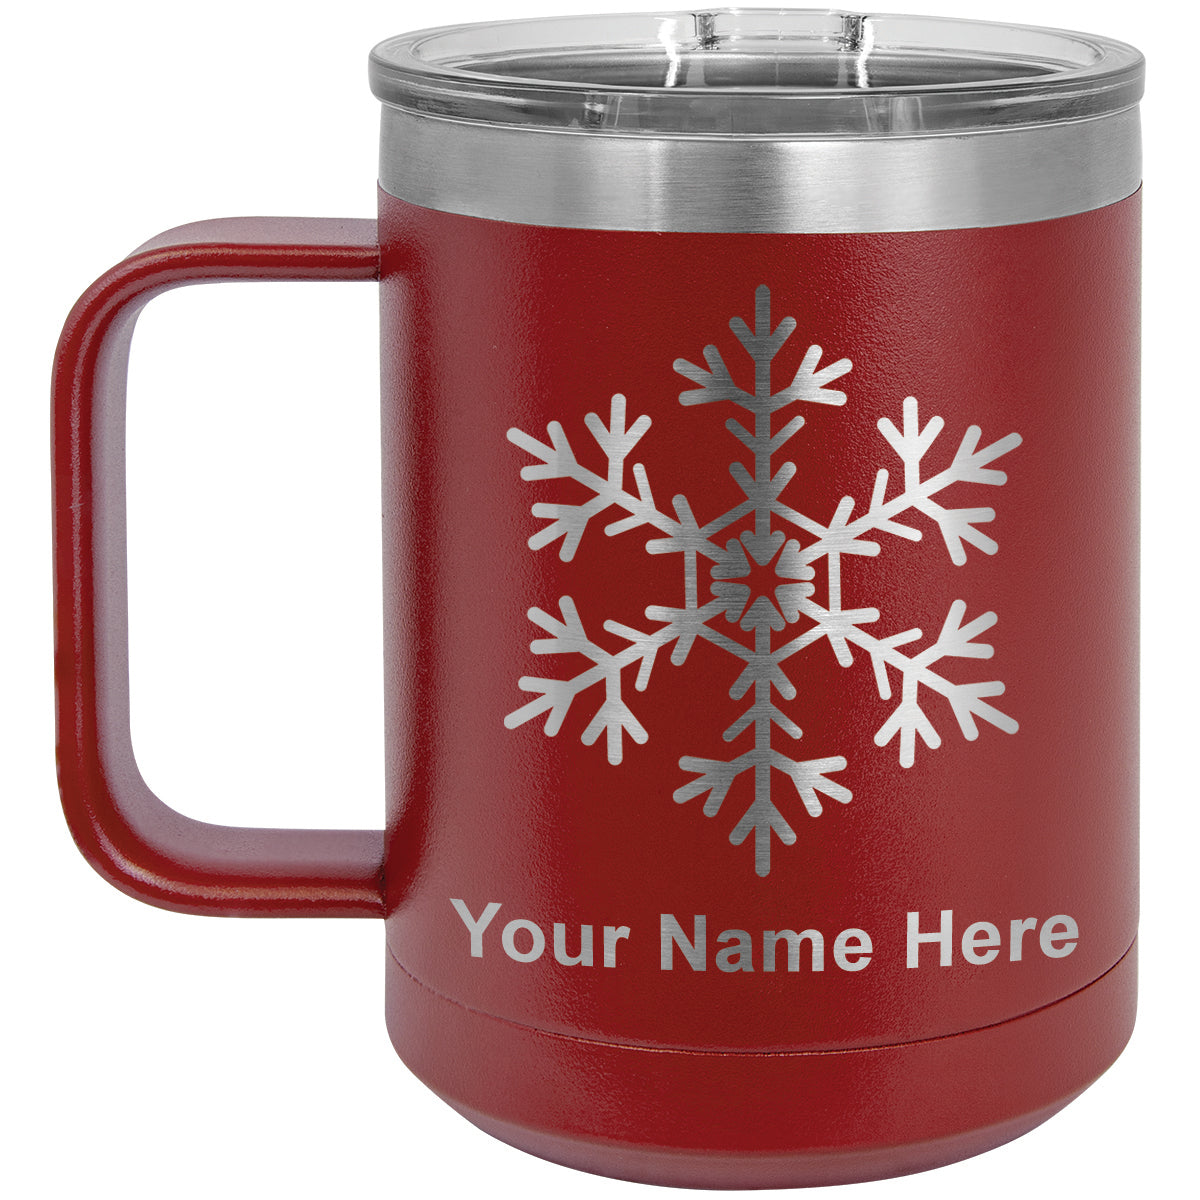 15oz Vacuum Insulated Coffee Mug, Snowflake, Personalized Engraving Included